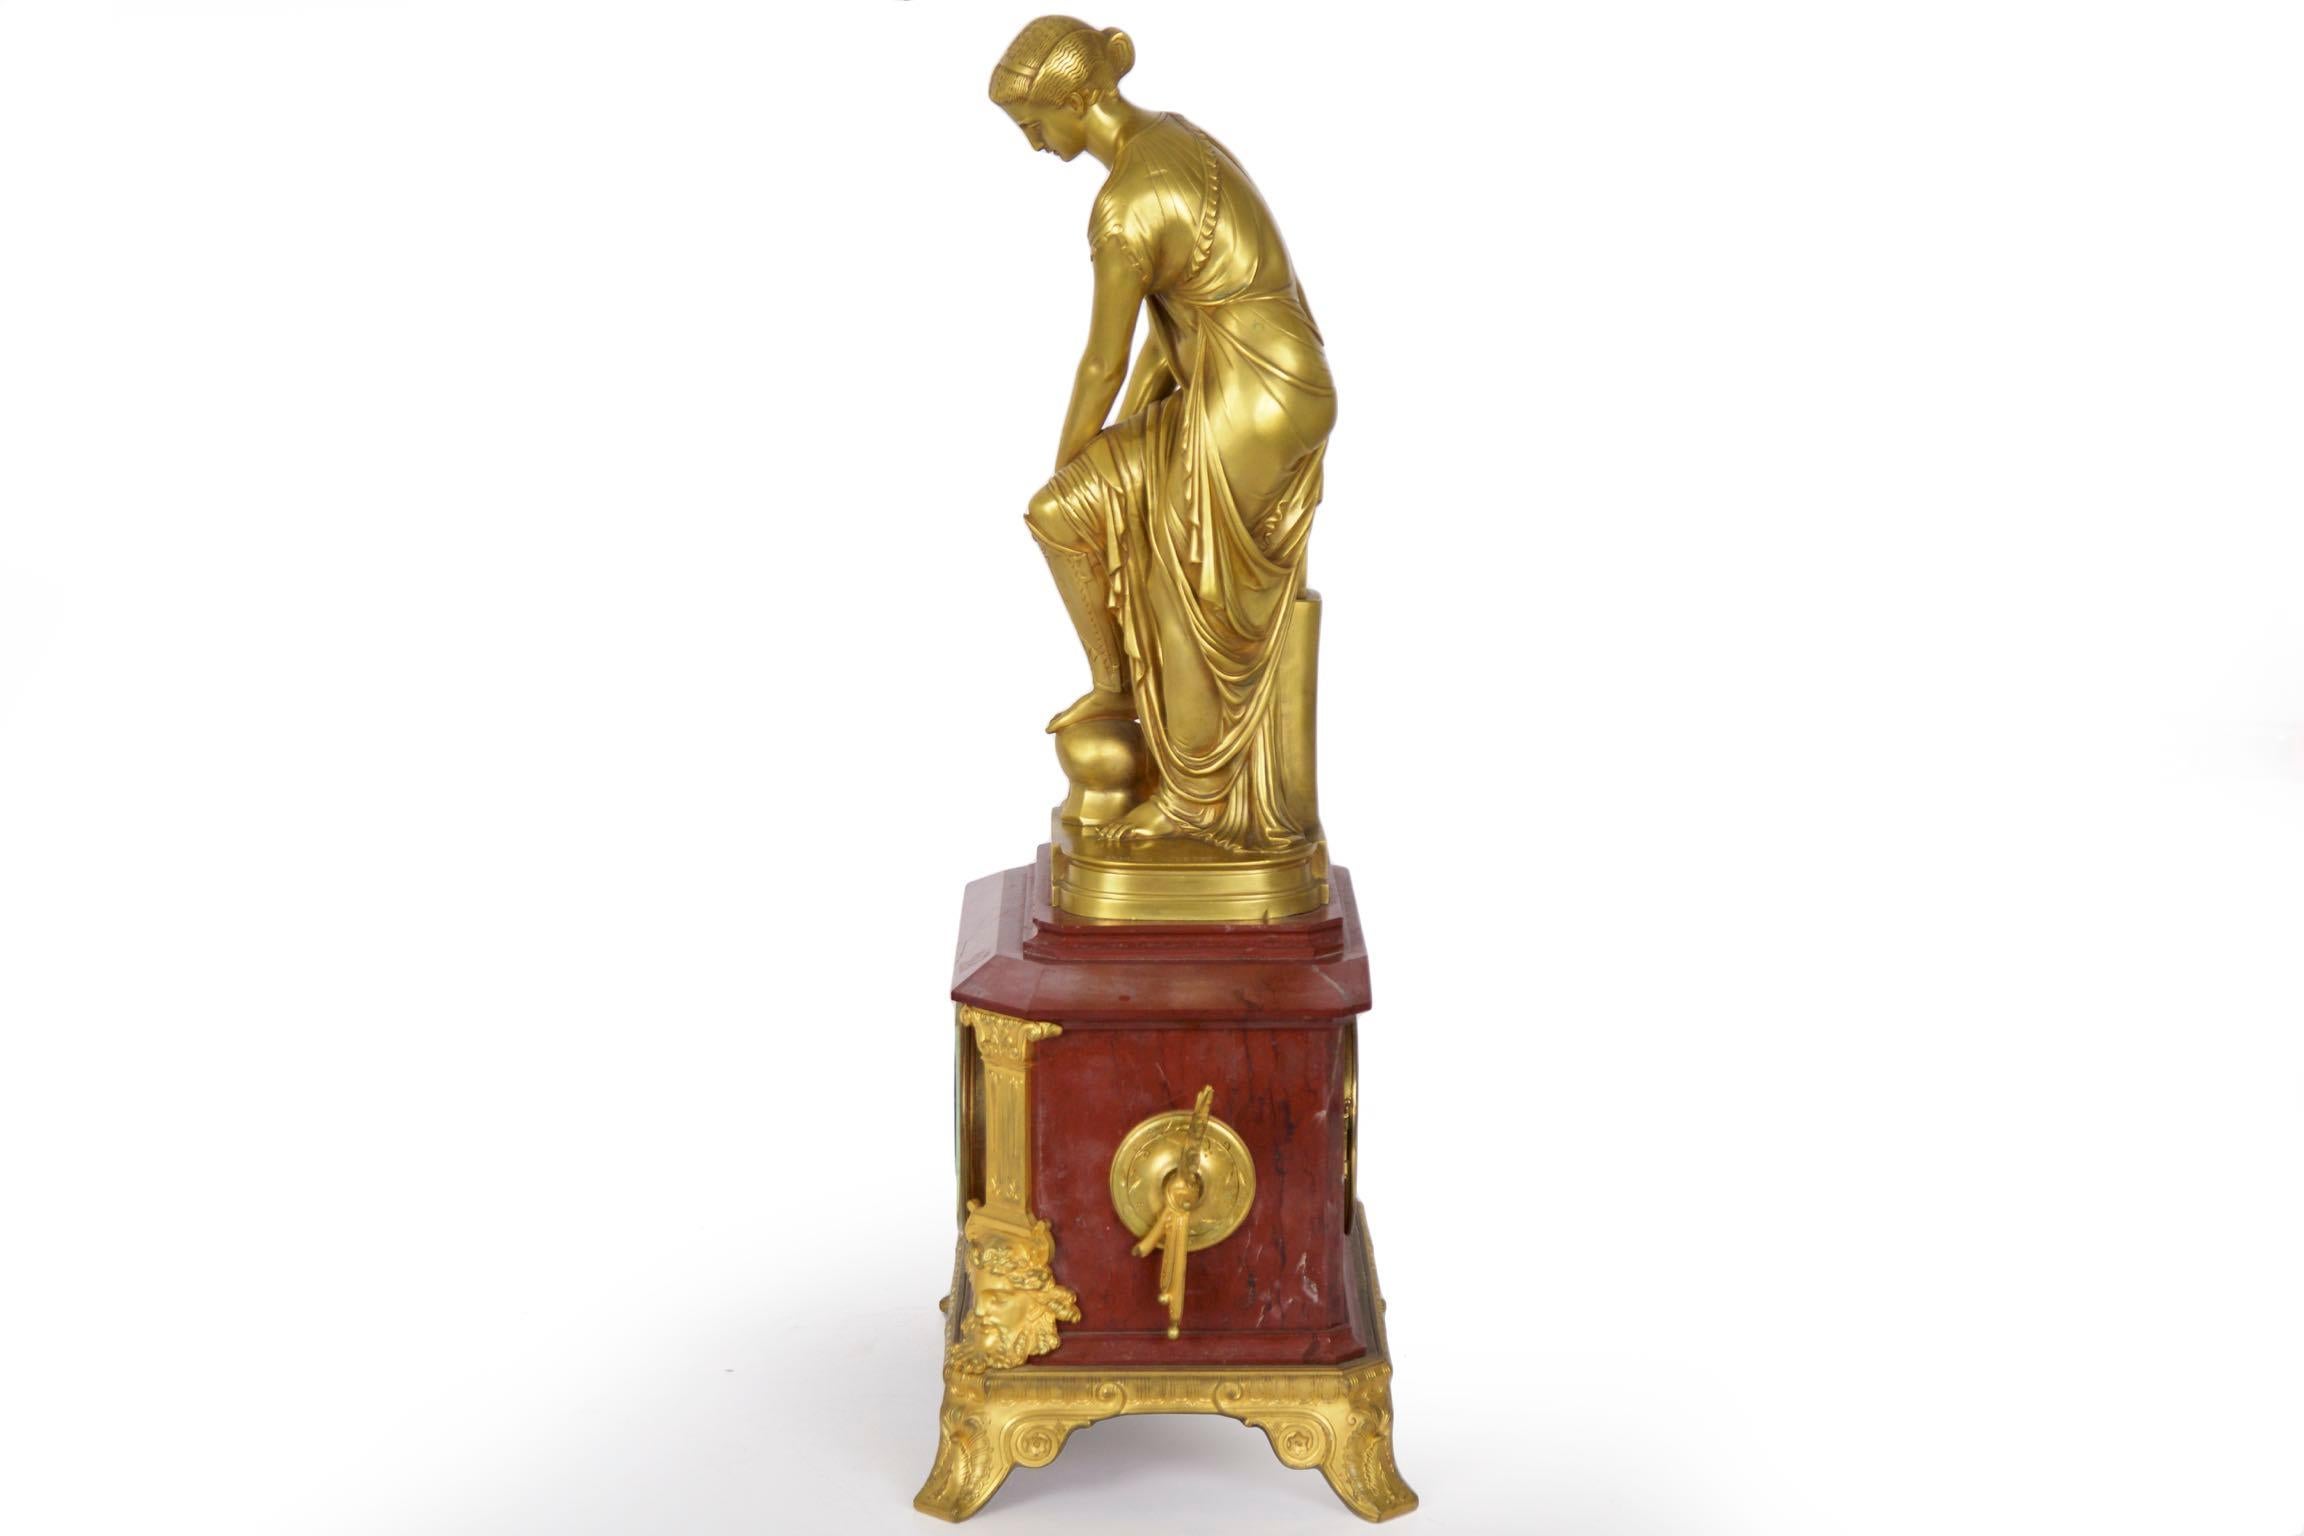 An exceptional presentation piece depicting the Greek goddess Thetis, the figure is executed by Pierre Emile Hébert in collaboration with the bronze fondeur Georges Emile Henri Servant. The two artists collaborated on several works in the Egyptian